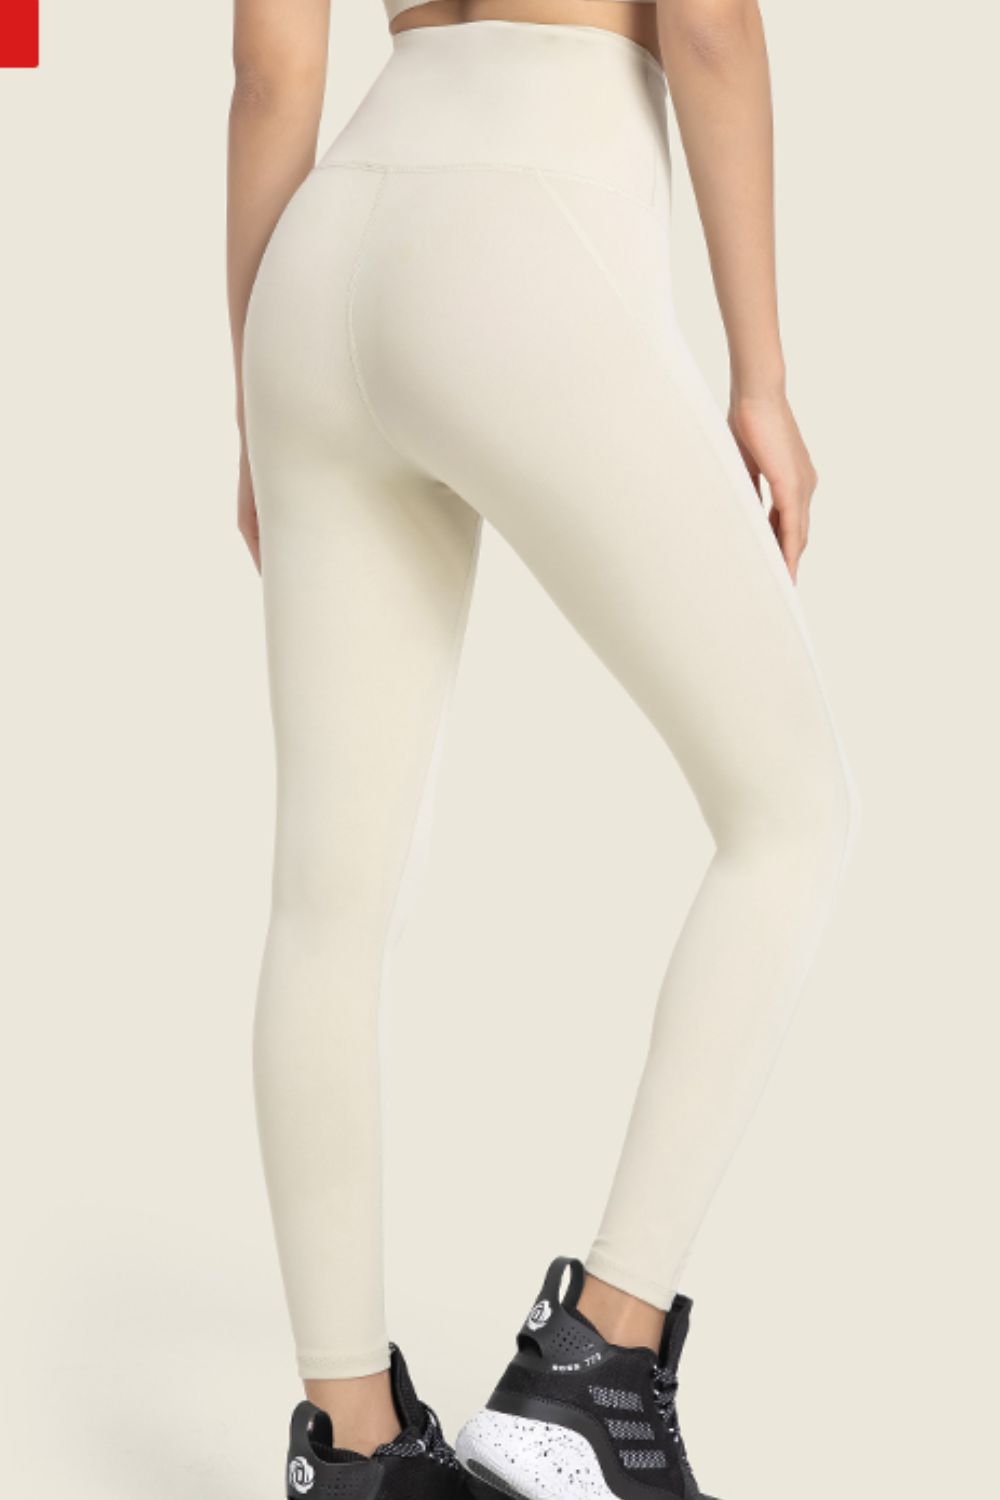 The best sculpting leggings to lift your bum and flatten your tum